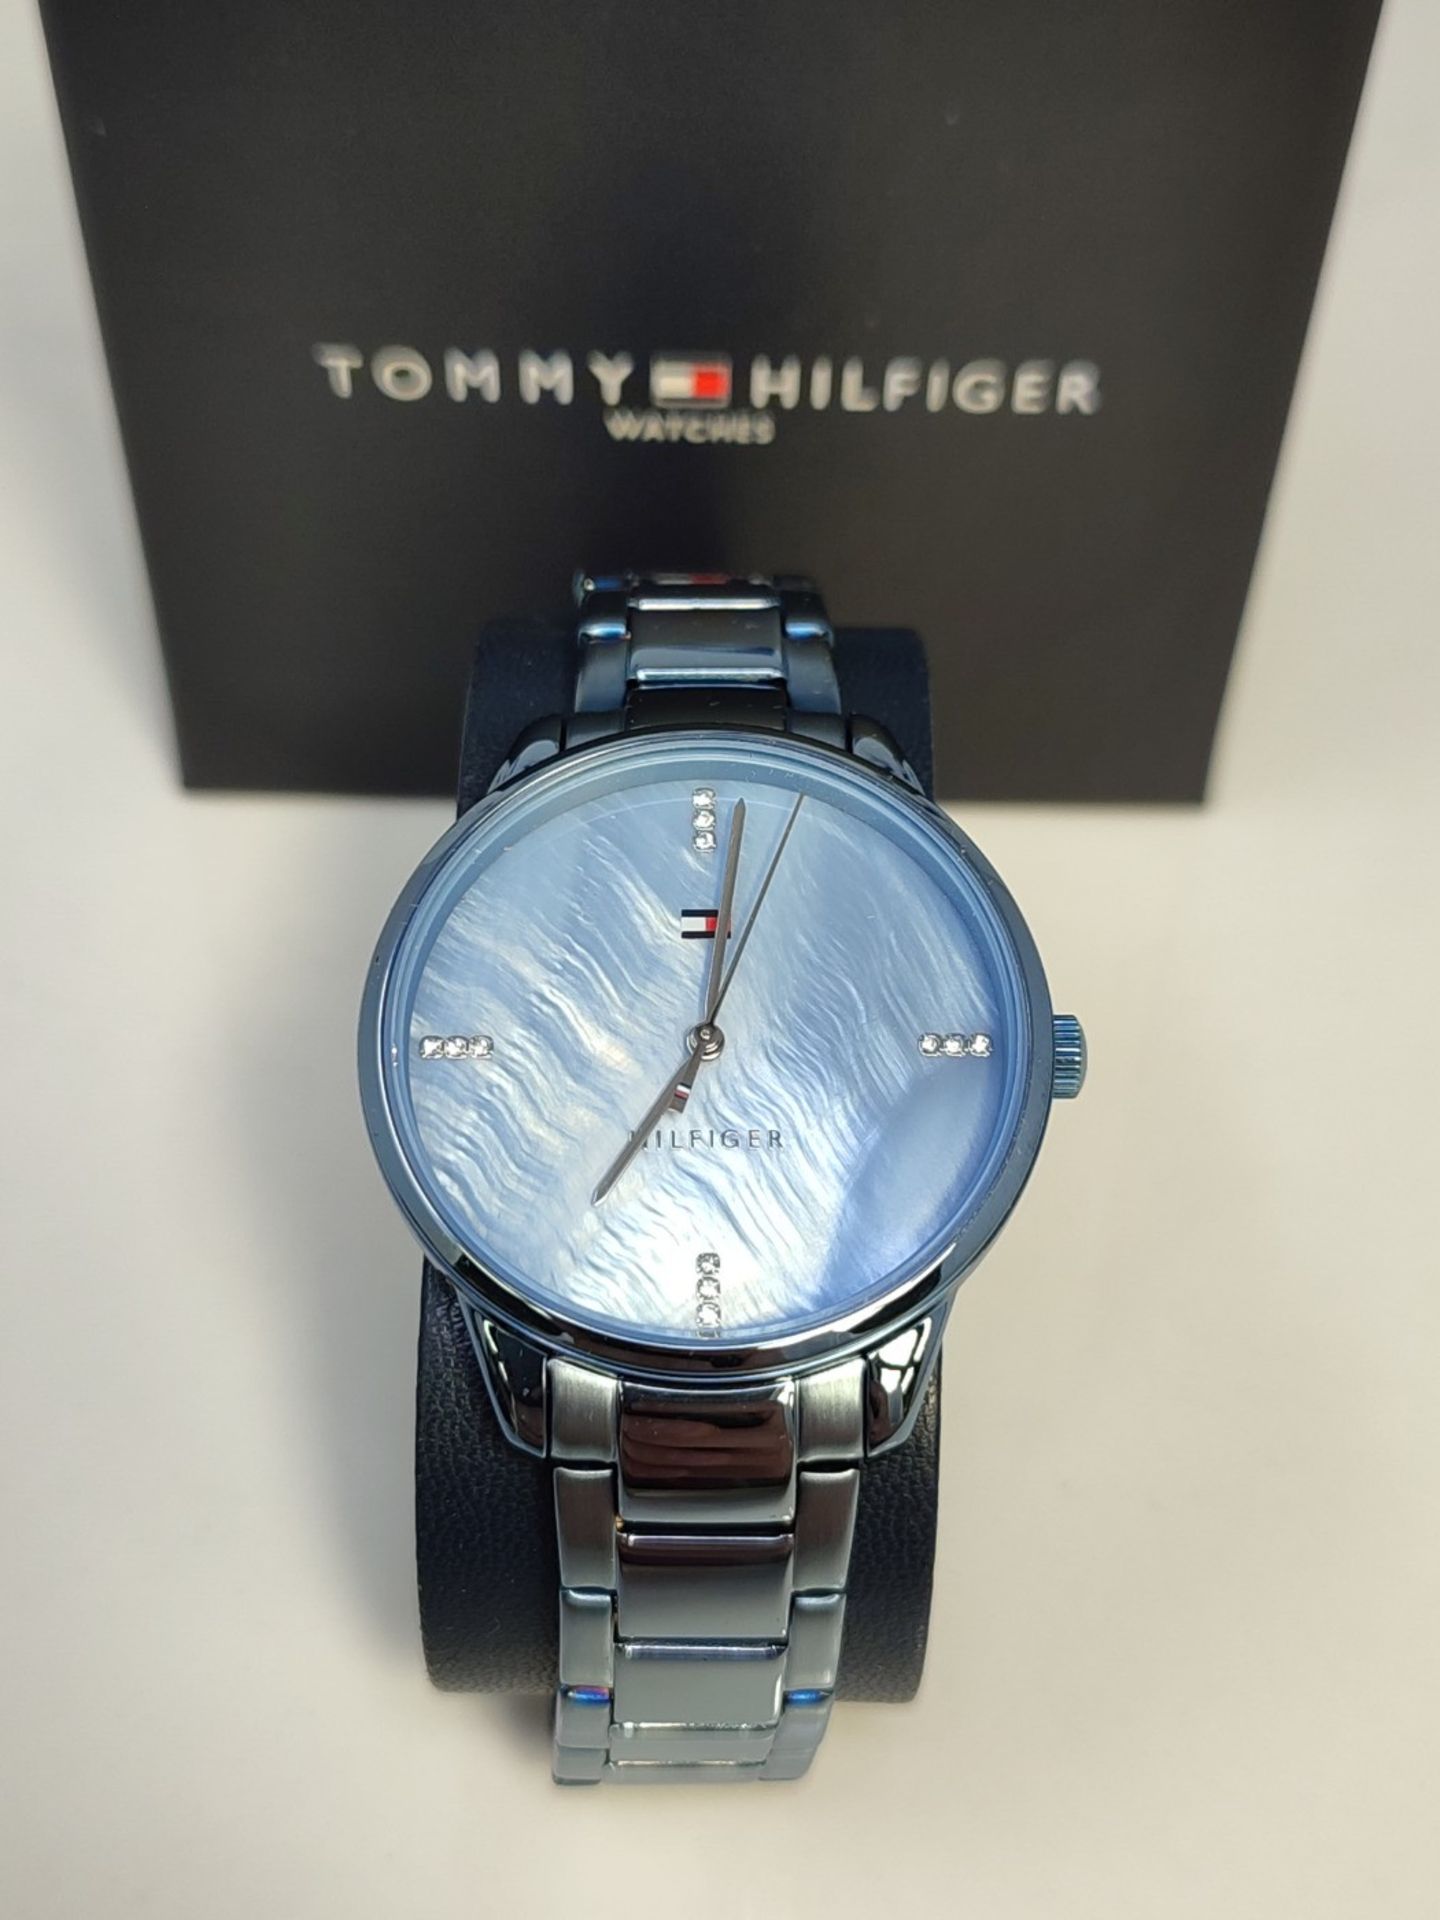 RRP £128.00 Tommy Hilfiger Women's Analog Quartz Watch with Blue Stainless Steel Strap - 1782547 - Image 2 of 3